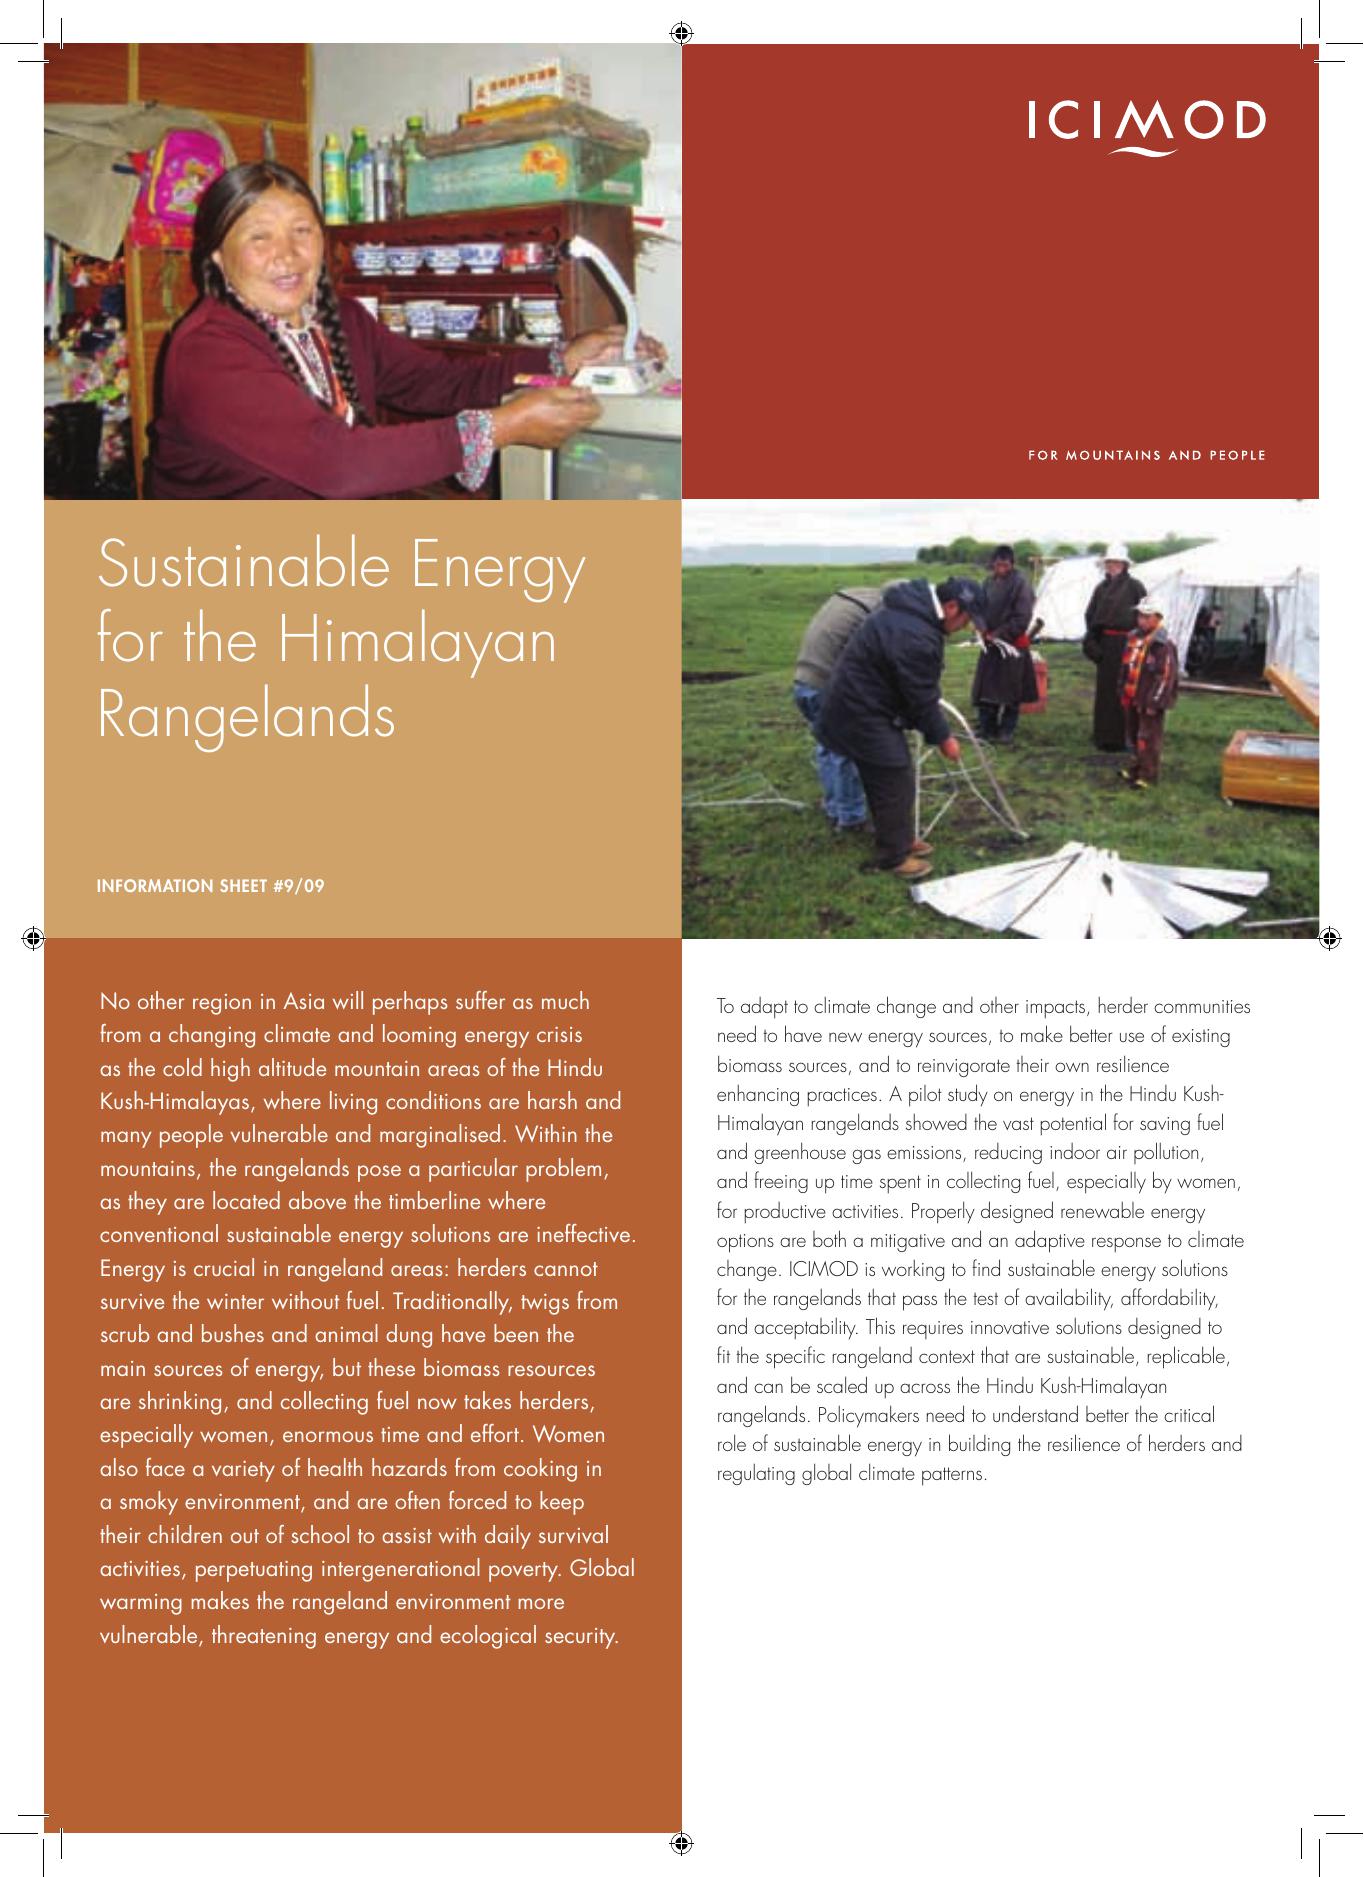 Sustainable Energy for the Himalayan Rangelands